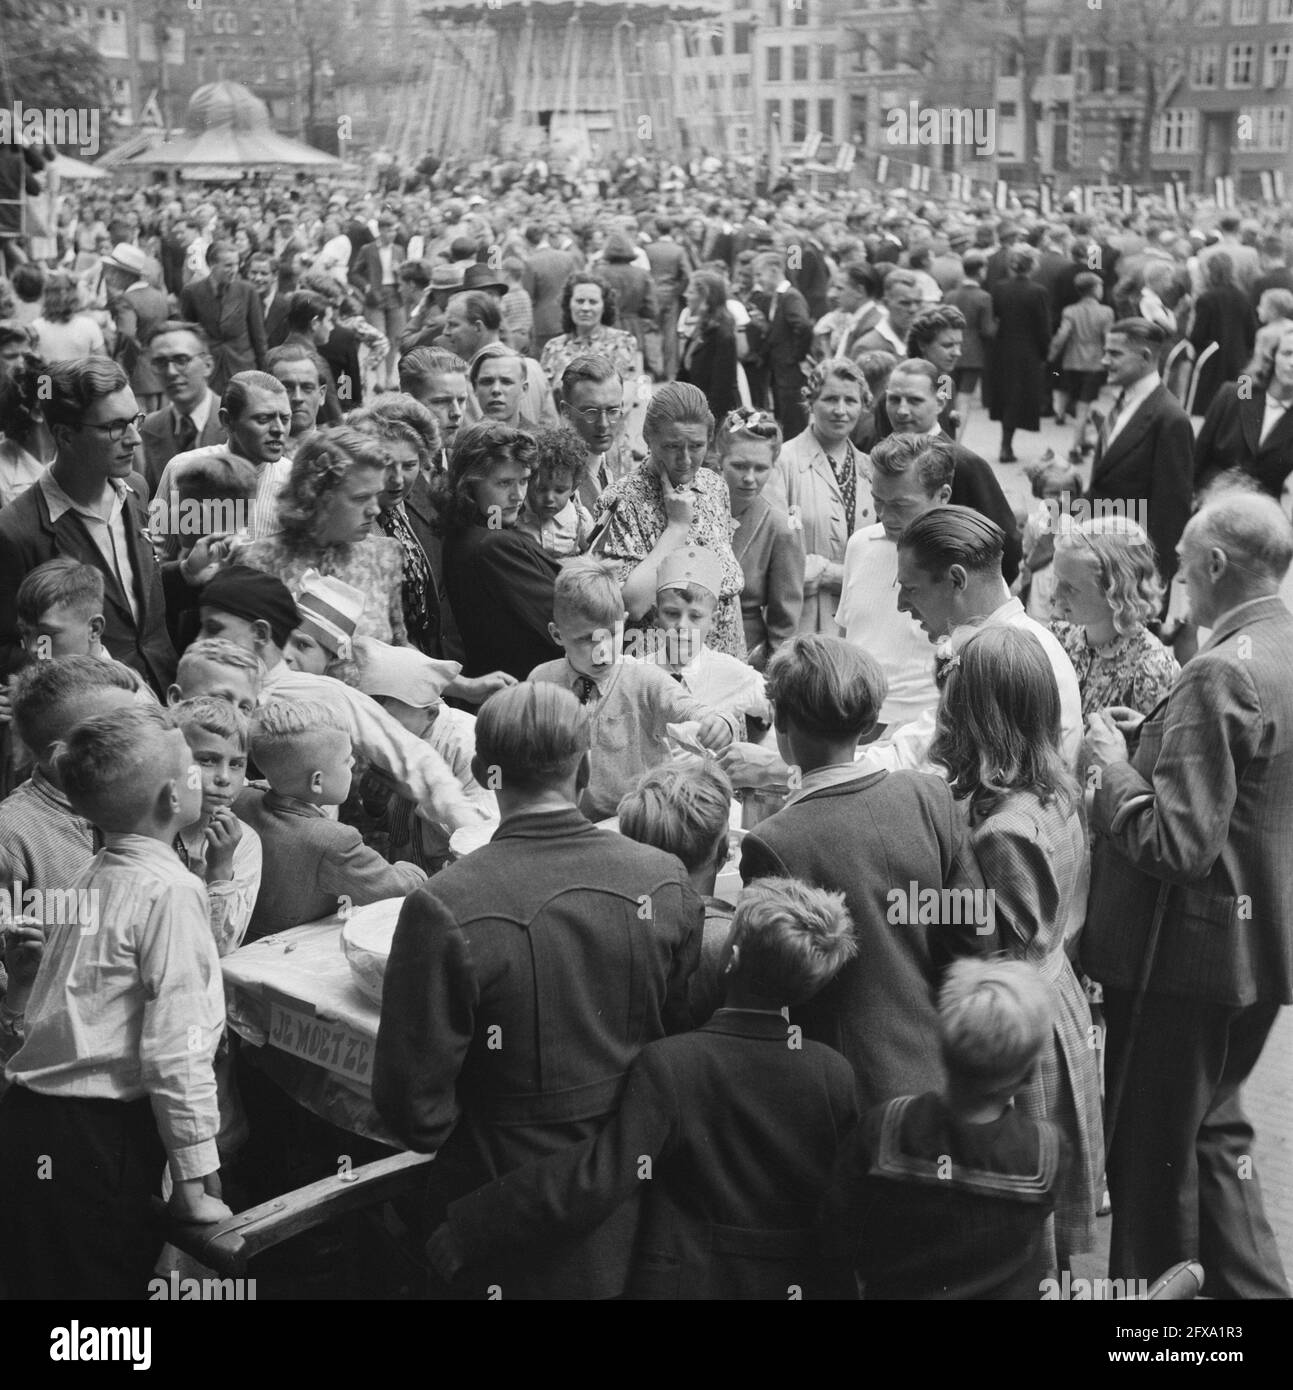 [Fairground on the Amstelveld], June 28th 1945, Liberation Celebrations, Second World War, The Netherlands, 20th century press agency photo, news to remember, documentary, historic photography 1945-1990, visual stories, human history of the Twentieth Century, capturing moments in time Stock Photo